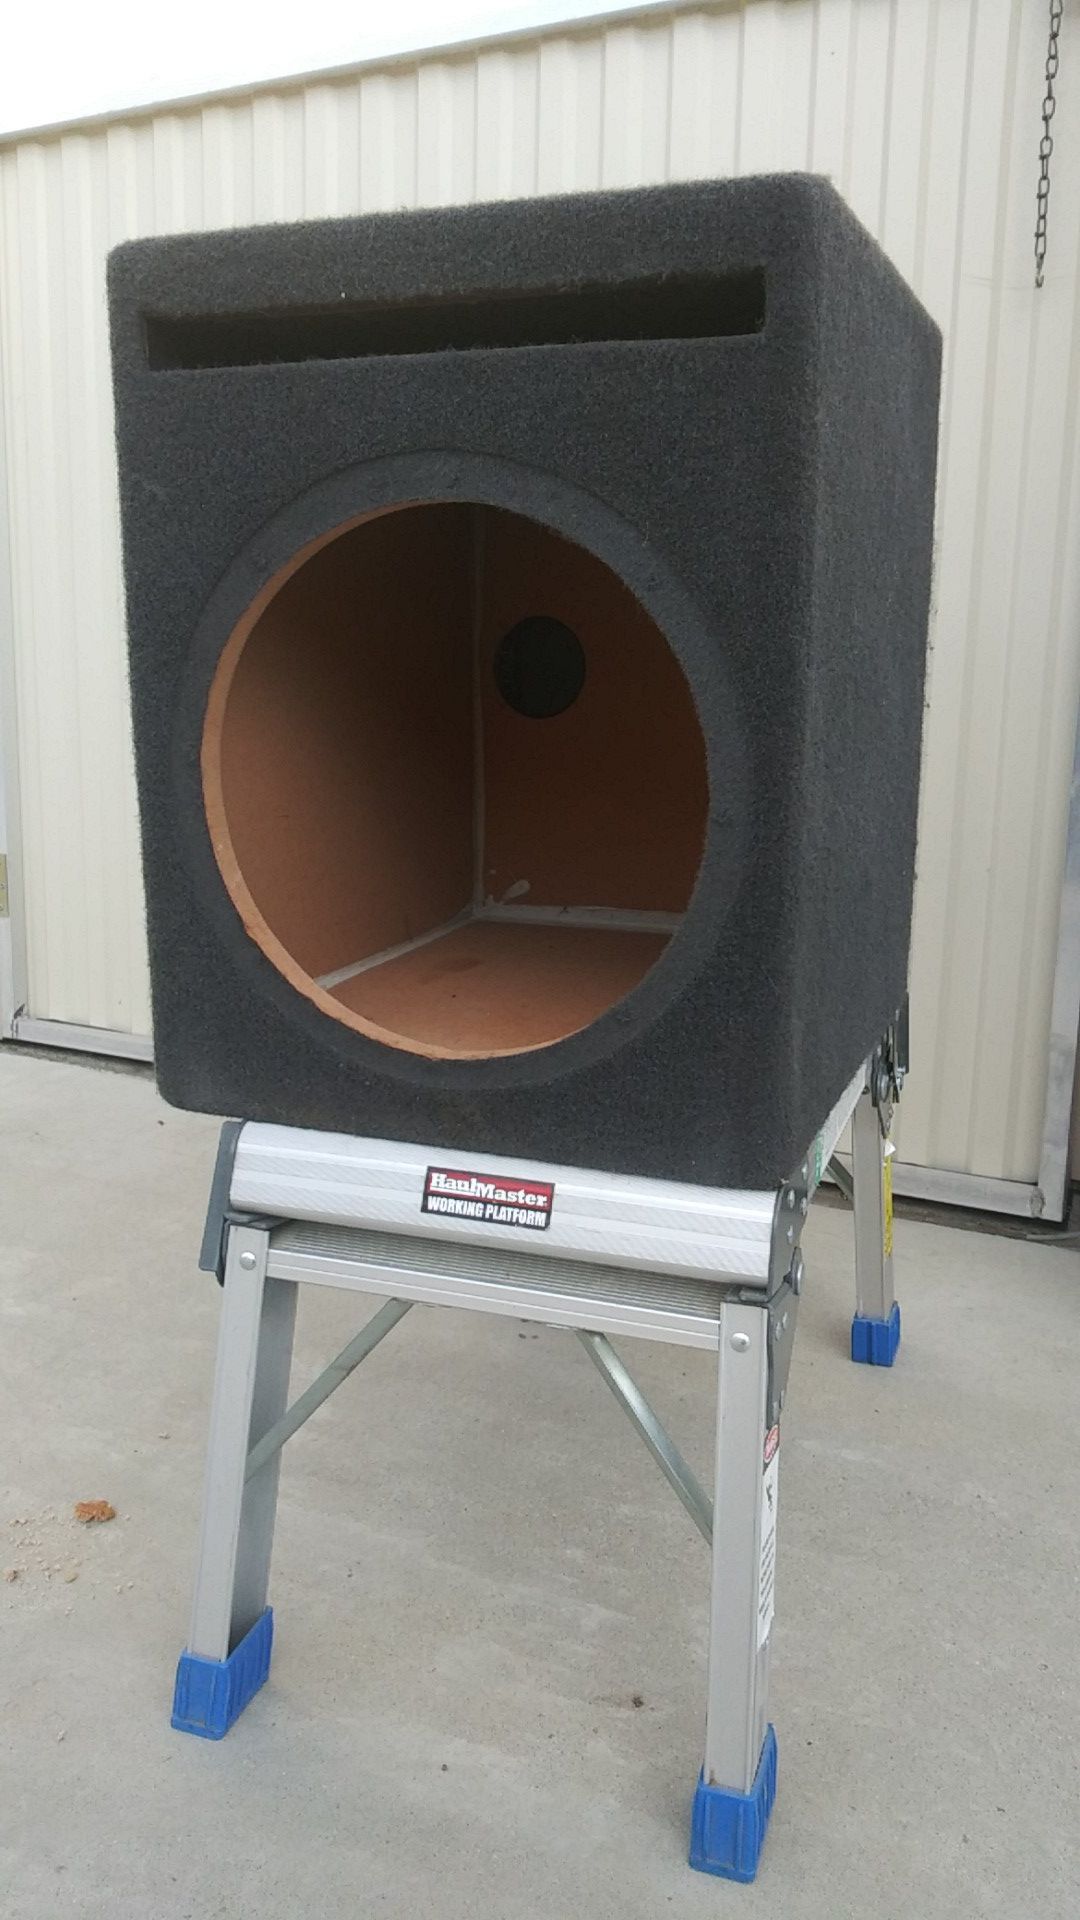 17 x 18 x 14 and 1/2 I believe it's a 15 inch speaker box ported good condition